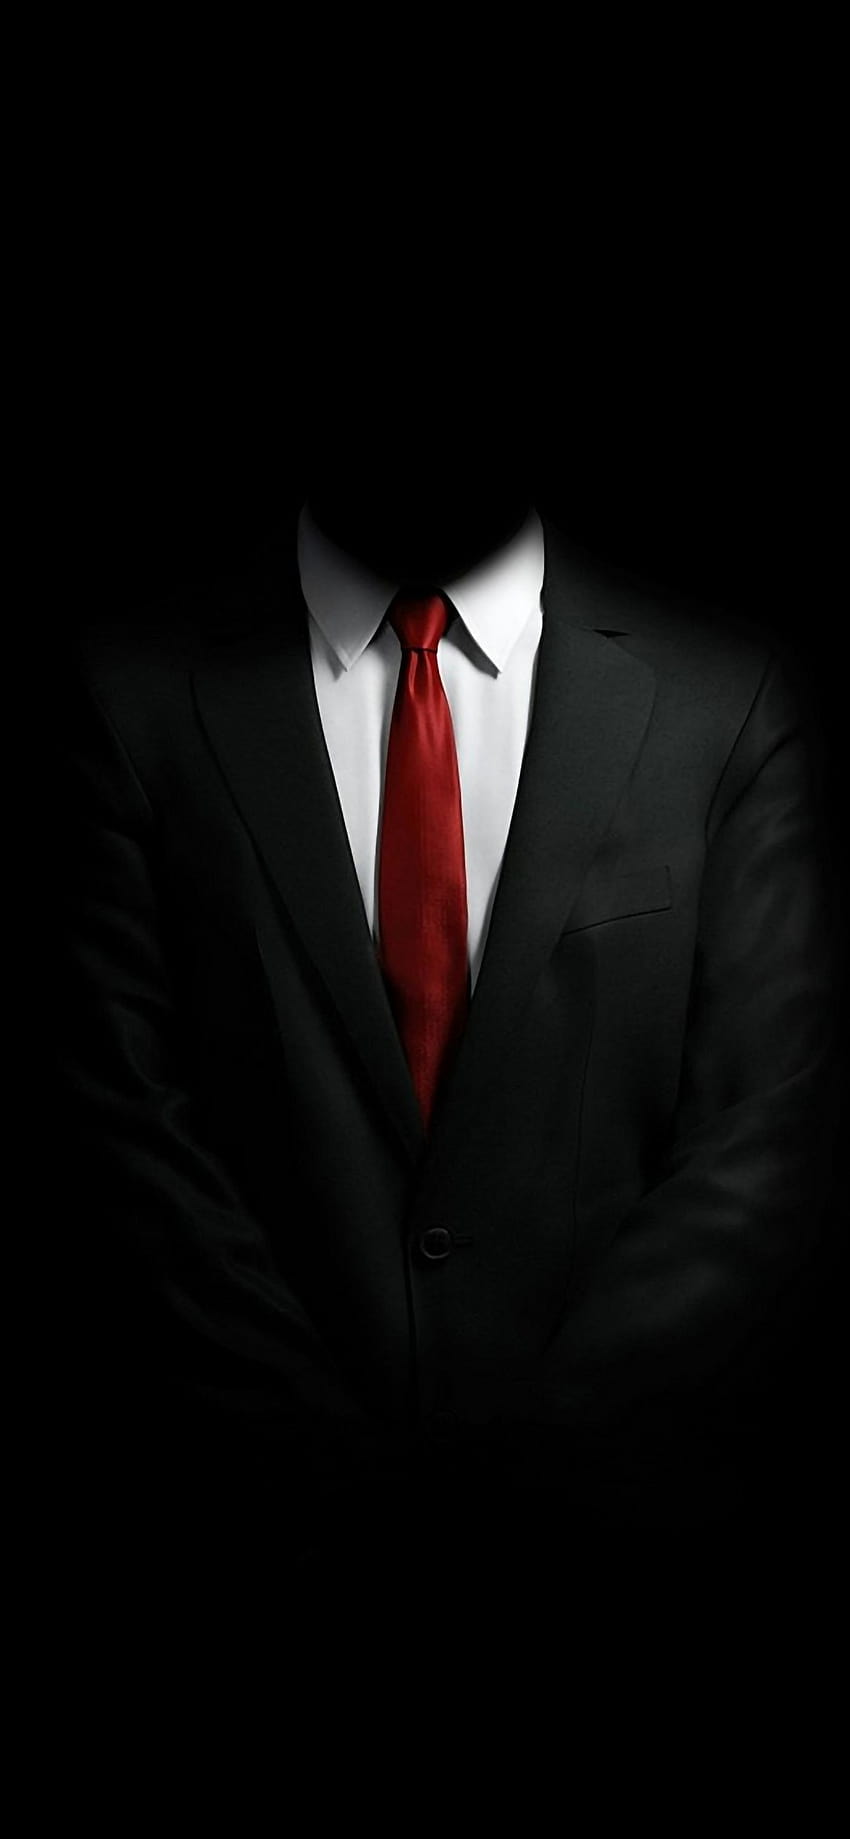 Mystery Man In Suit iPhone wallpaper ponsel HD